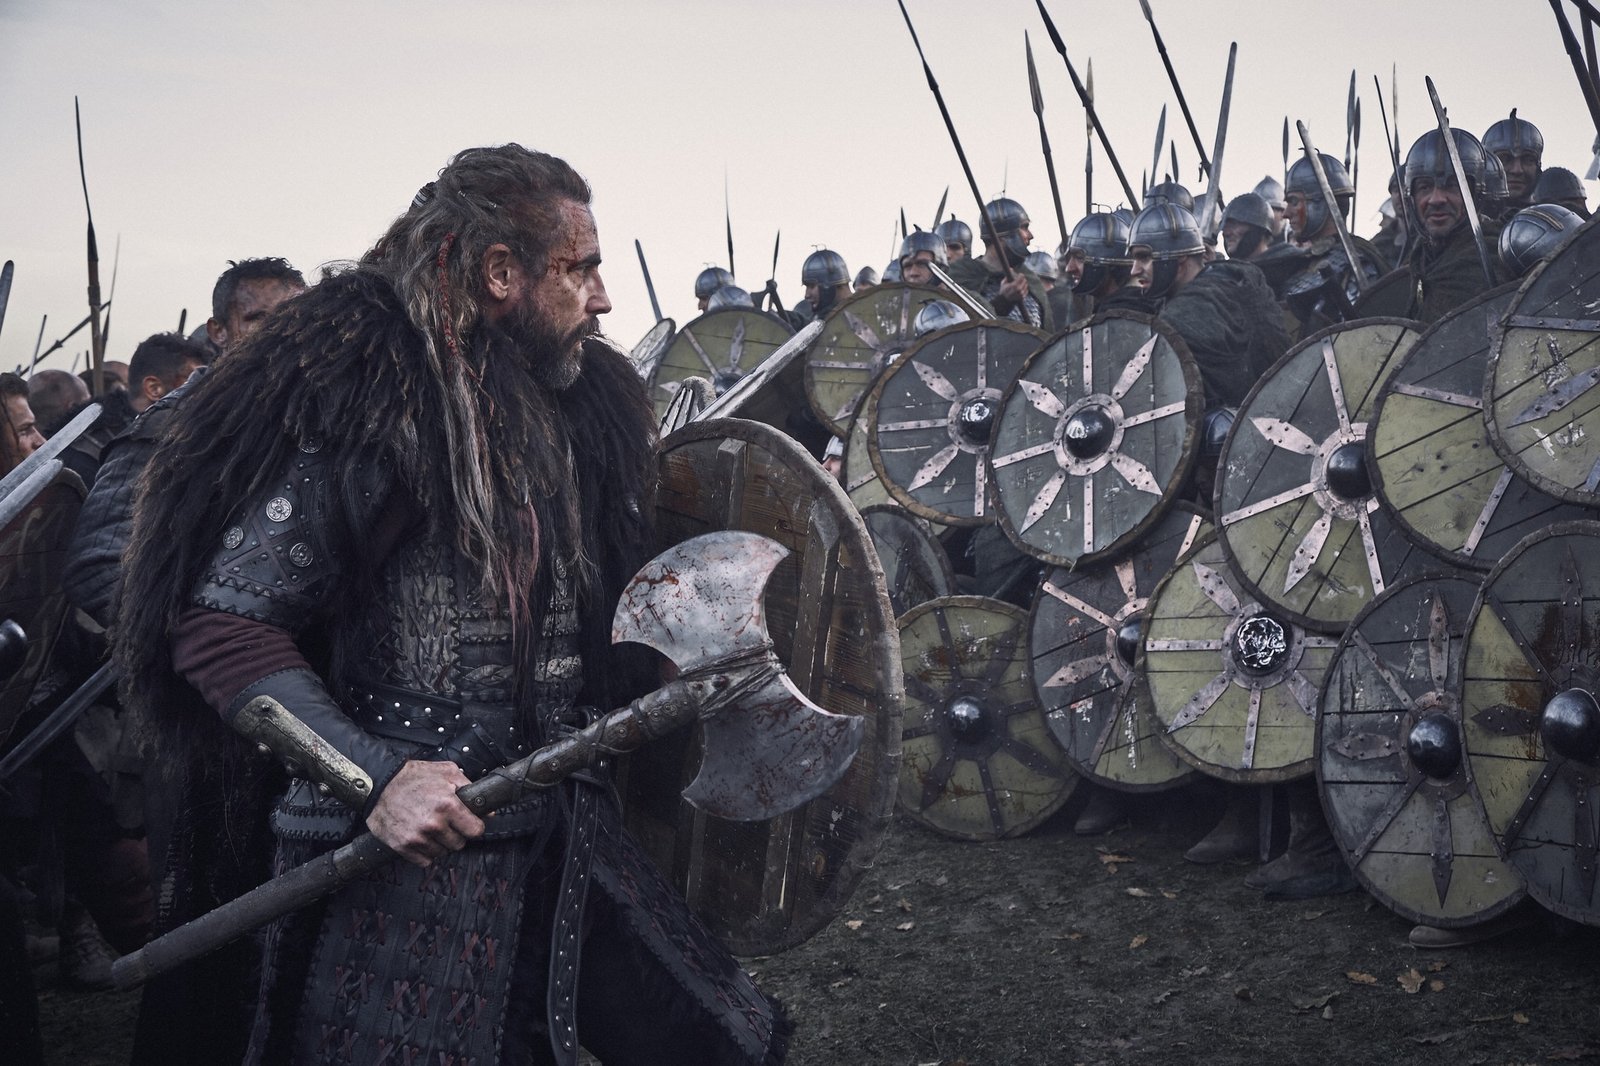 What Will Replace Game of Thrones? - The Last Kingdom